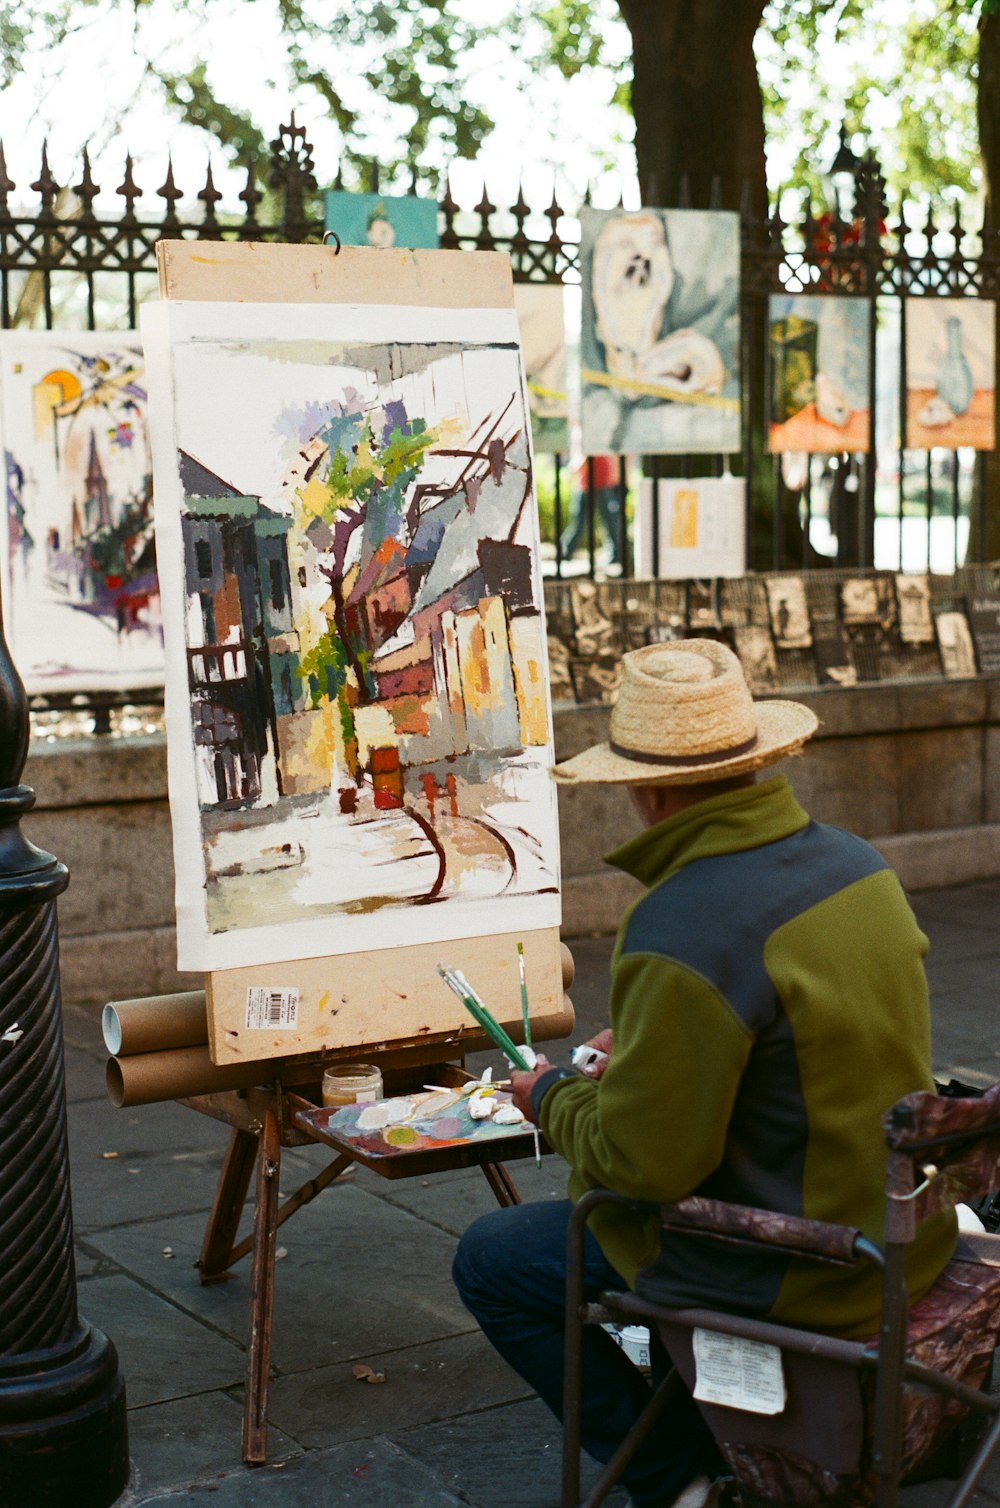 sitting man painting in front of fence with hanged paintings